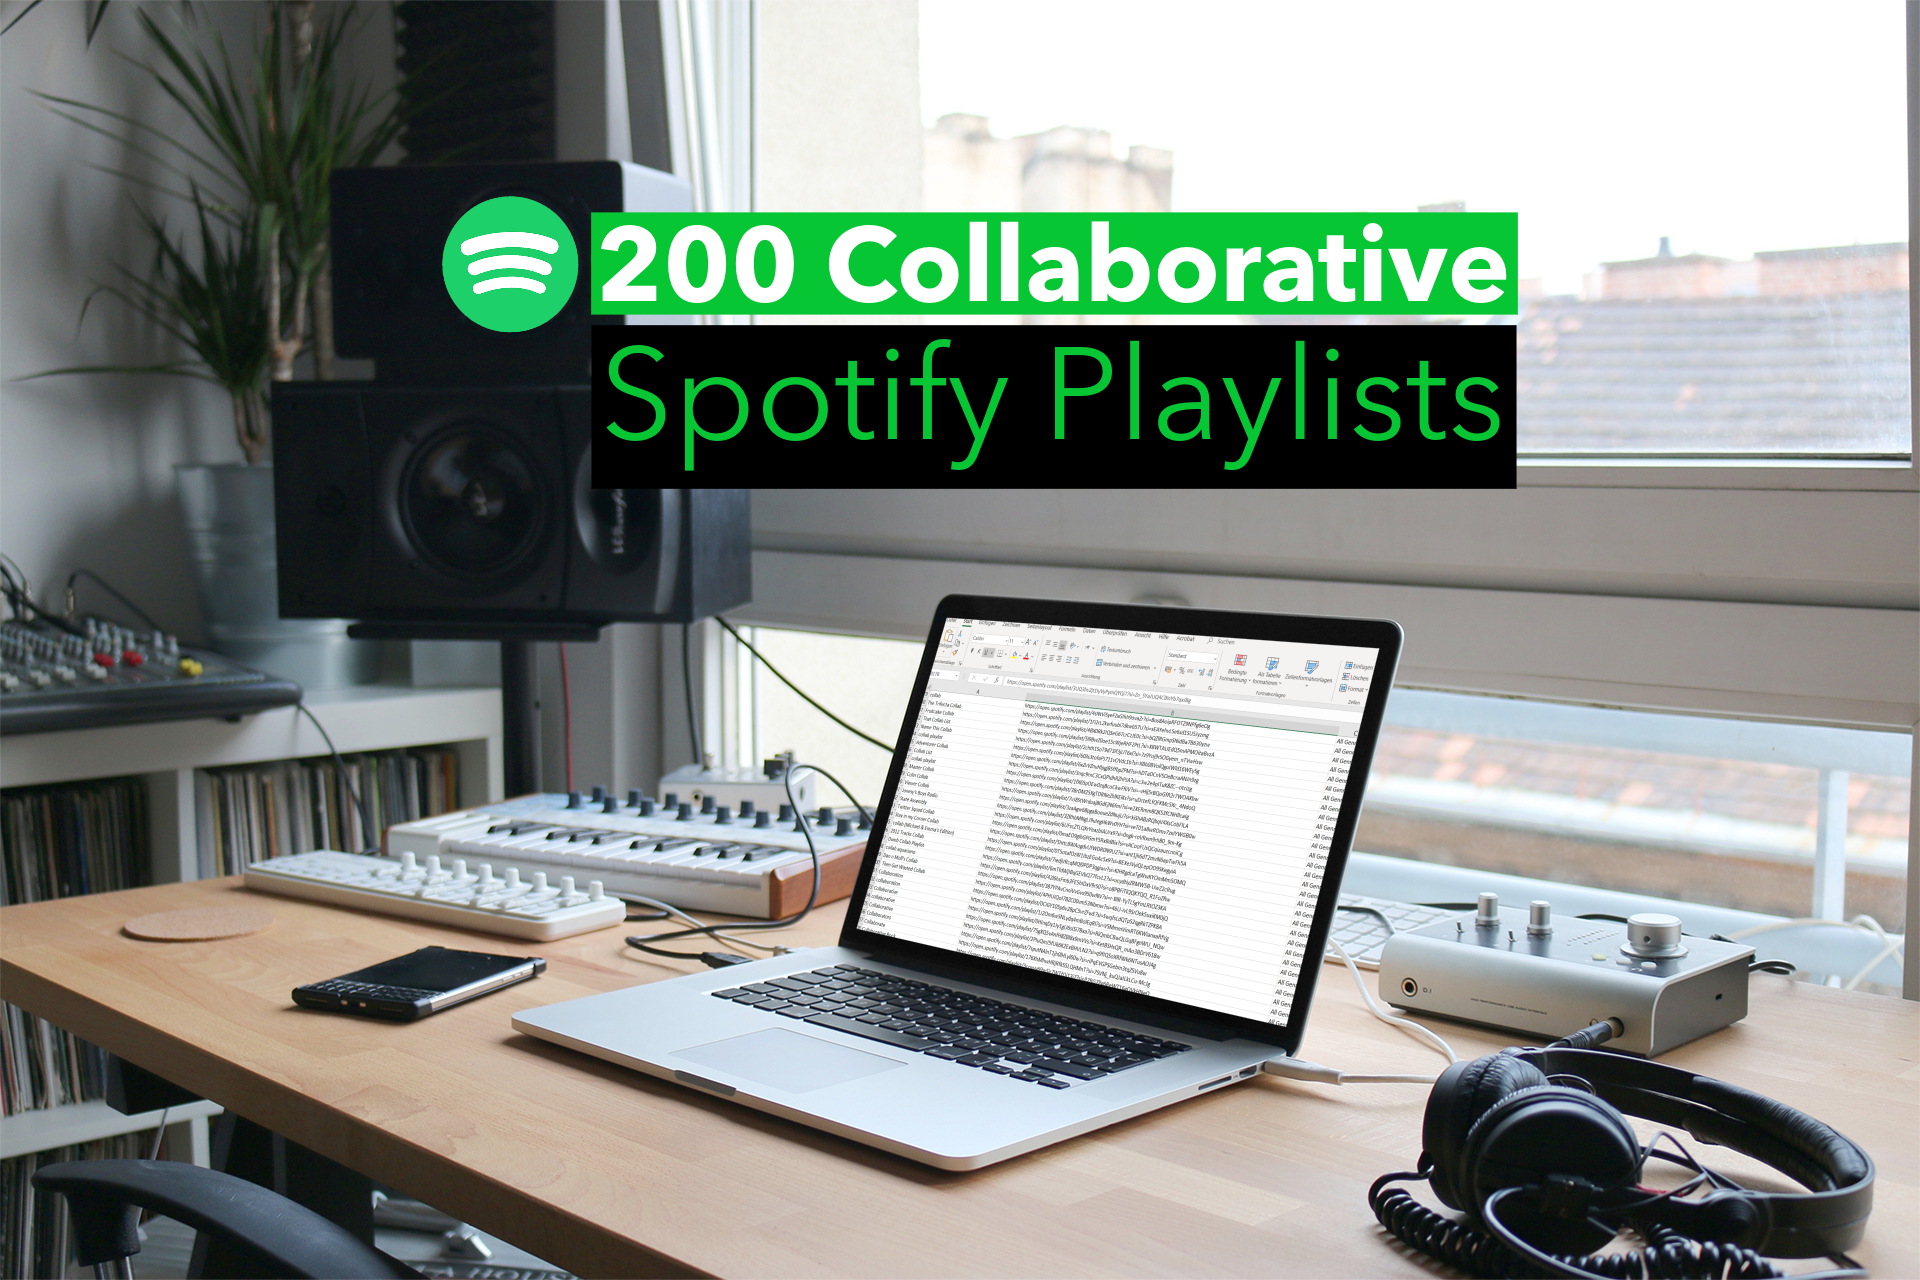 200 Collaborative Spotify Playlists to add your song for free as Excel file sorted by Genre